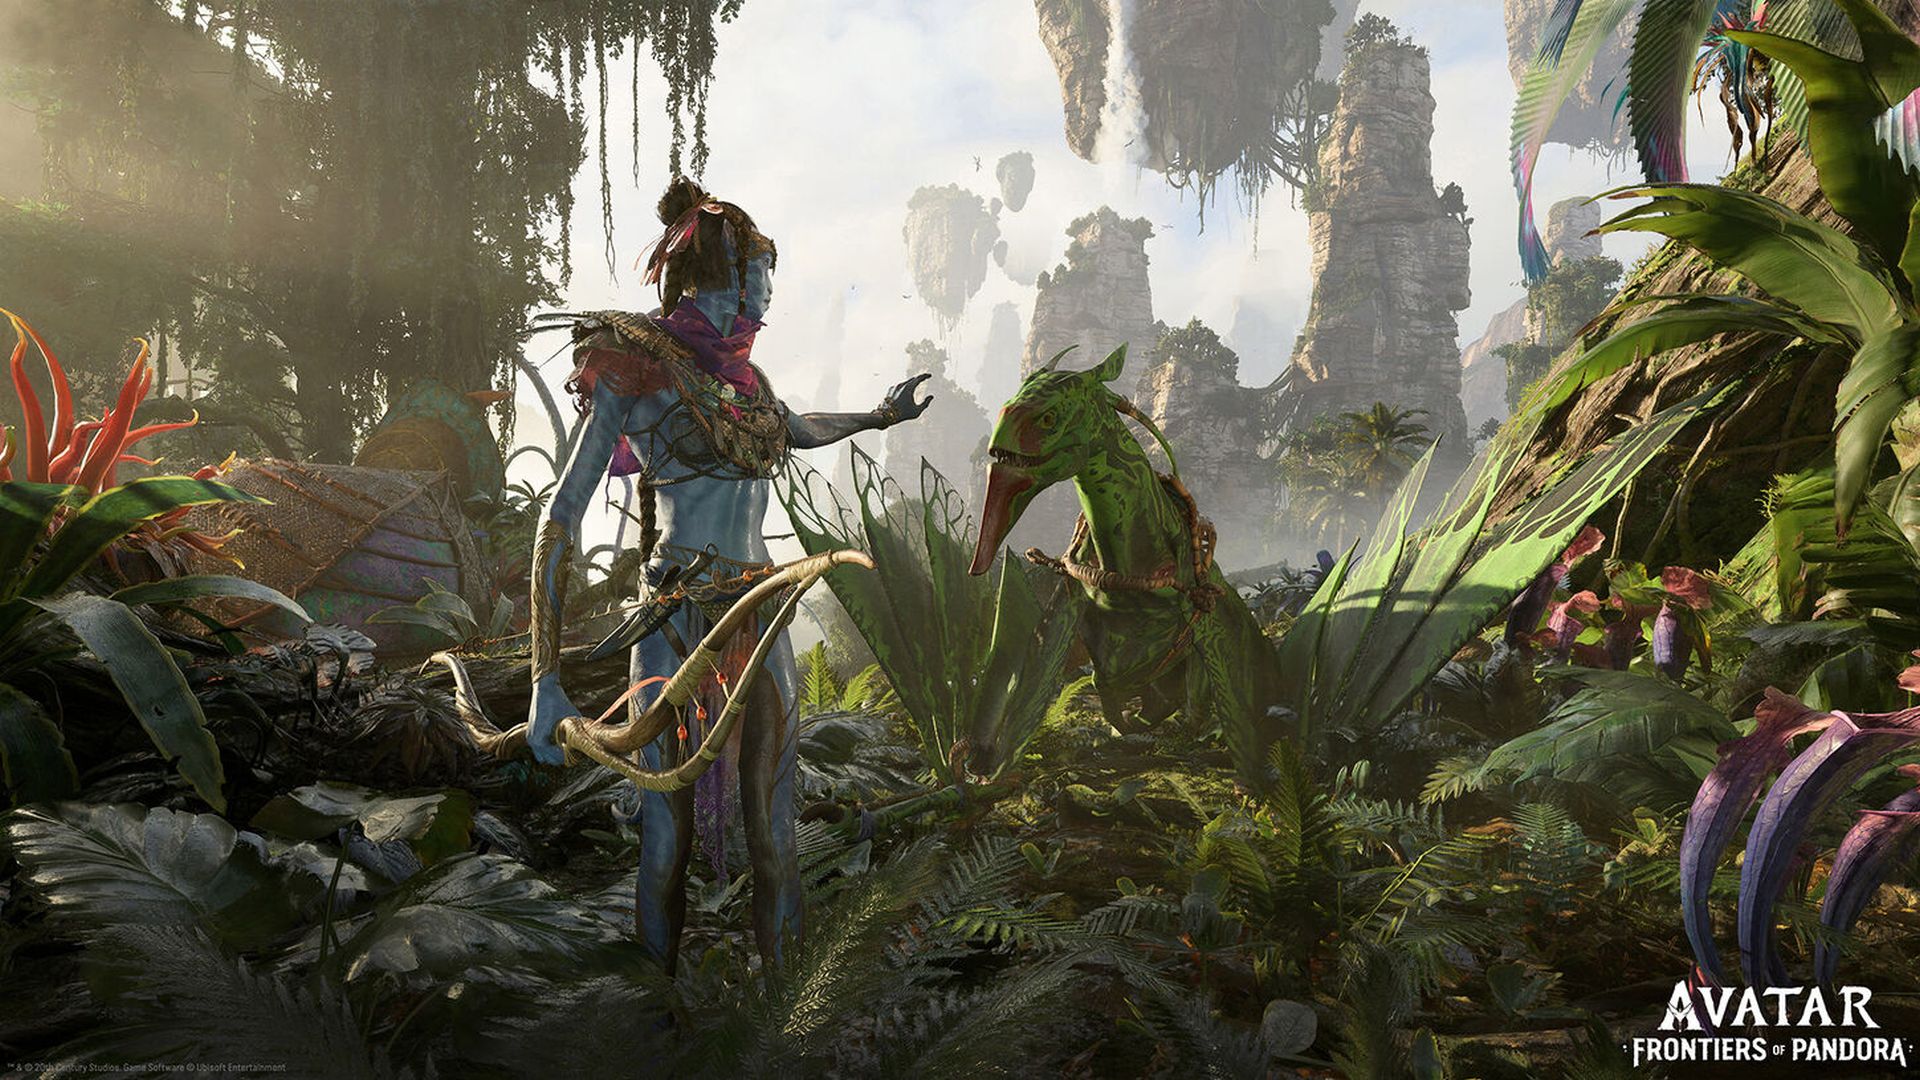 Avatar: Frontiers of Pandora Announced For Series X and PS5